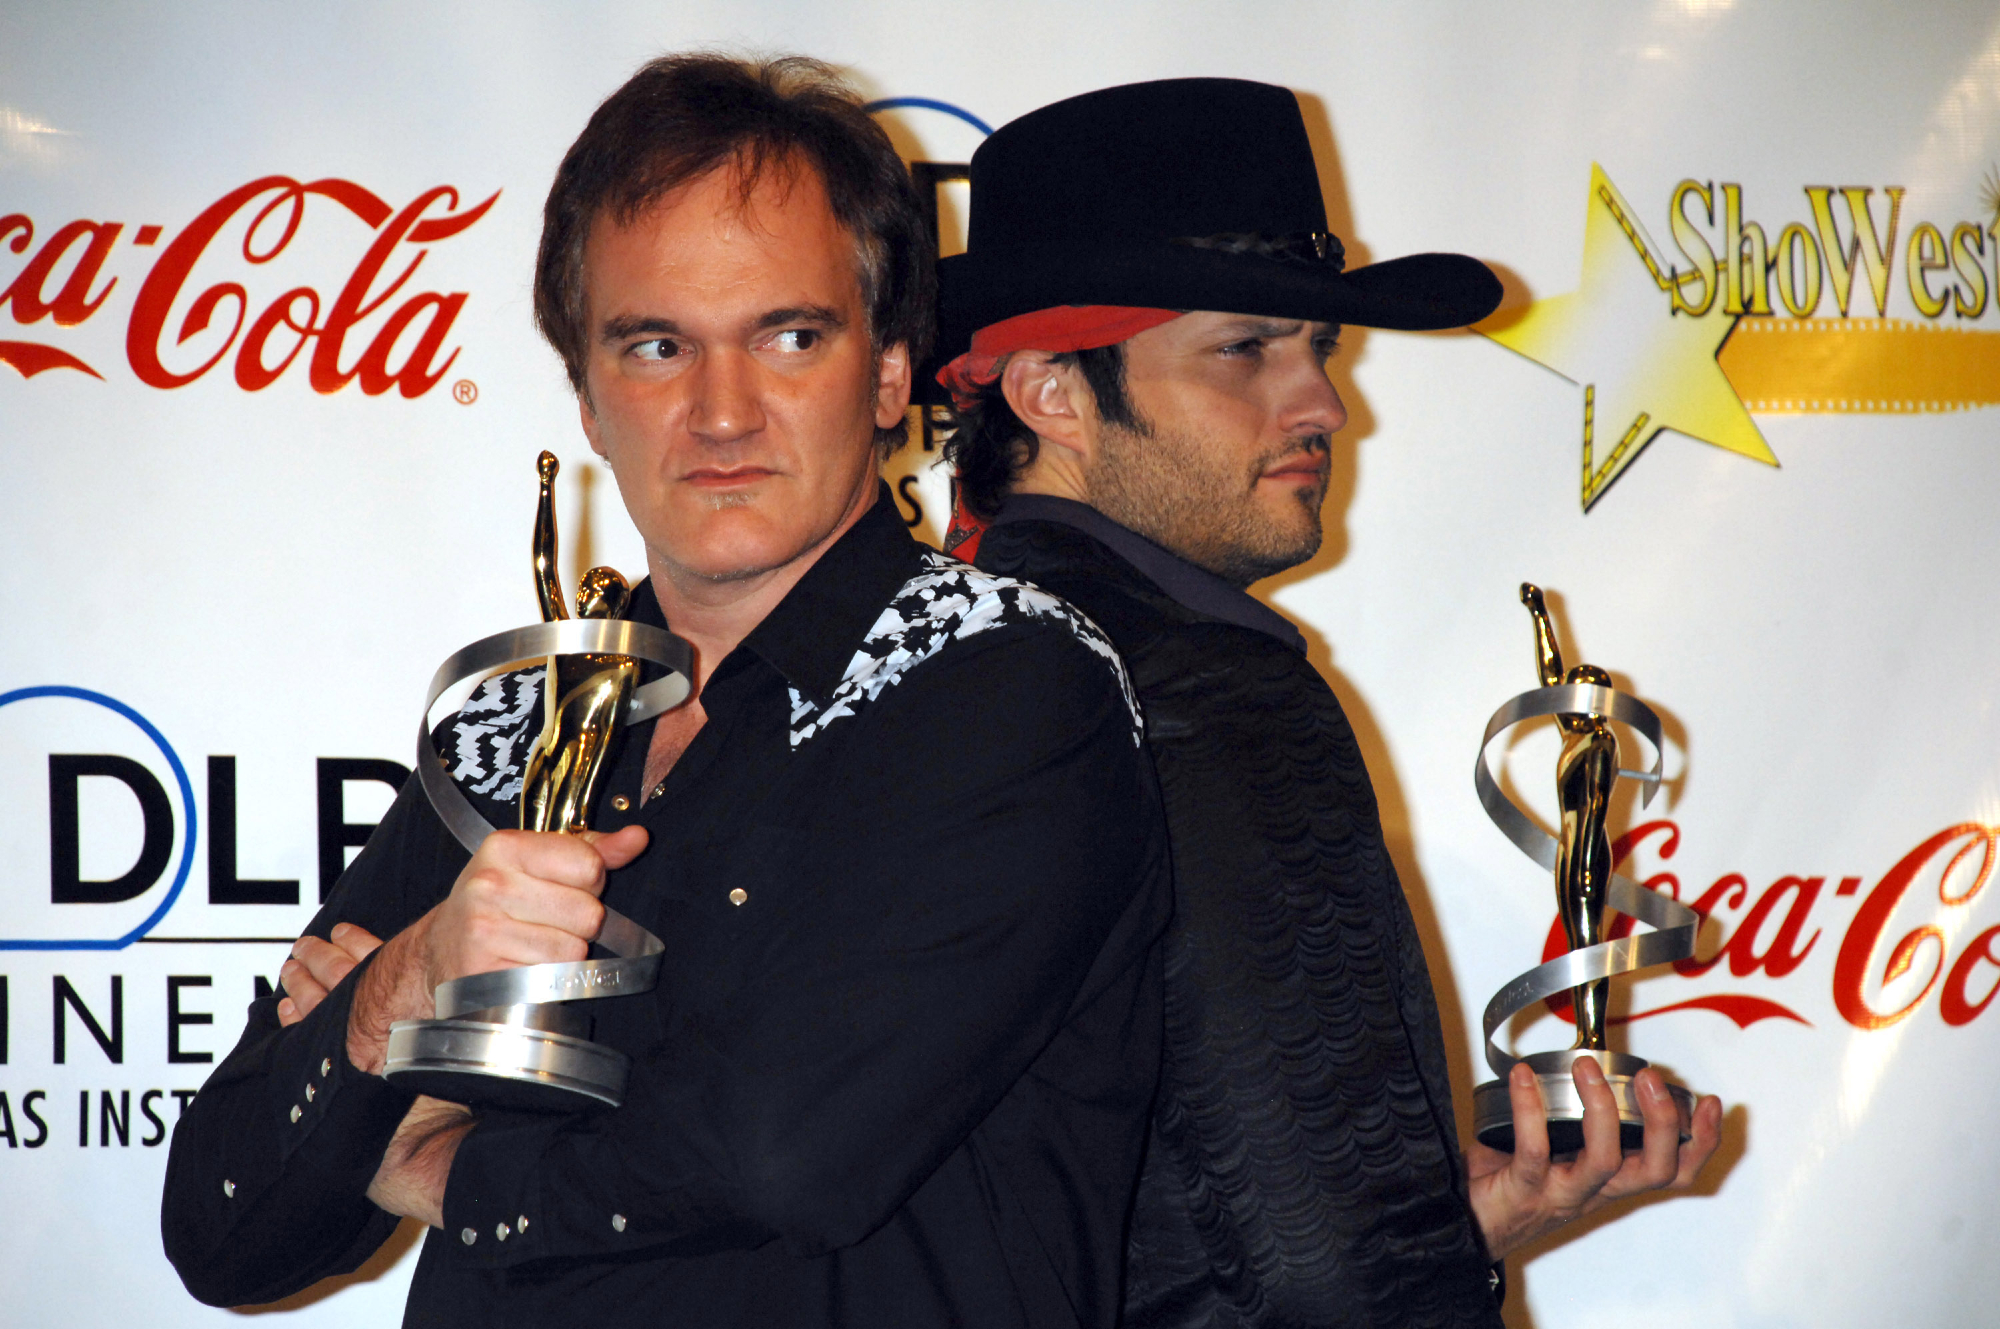 Quentin Tarantino and Robert Rodriguez at the 2007 ShoWest Award Ceremony standing back-to-back holding their awards